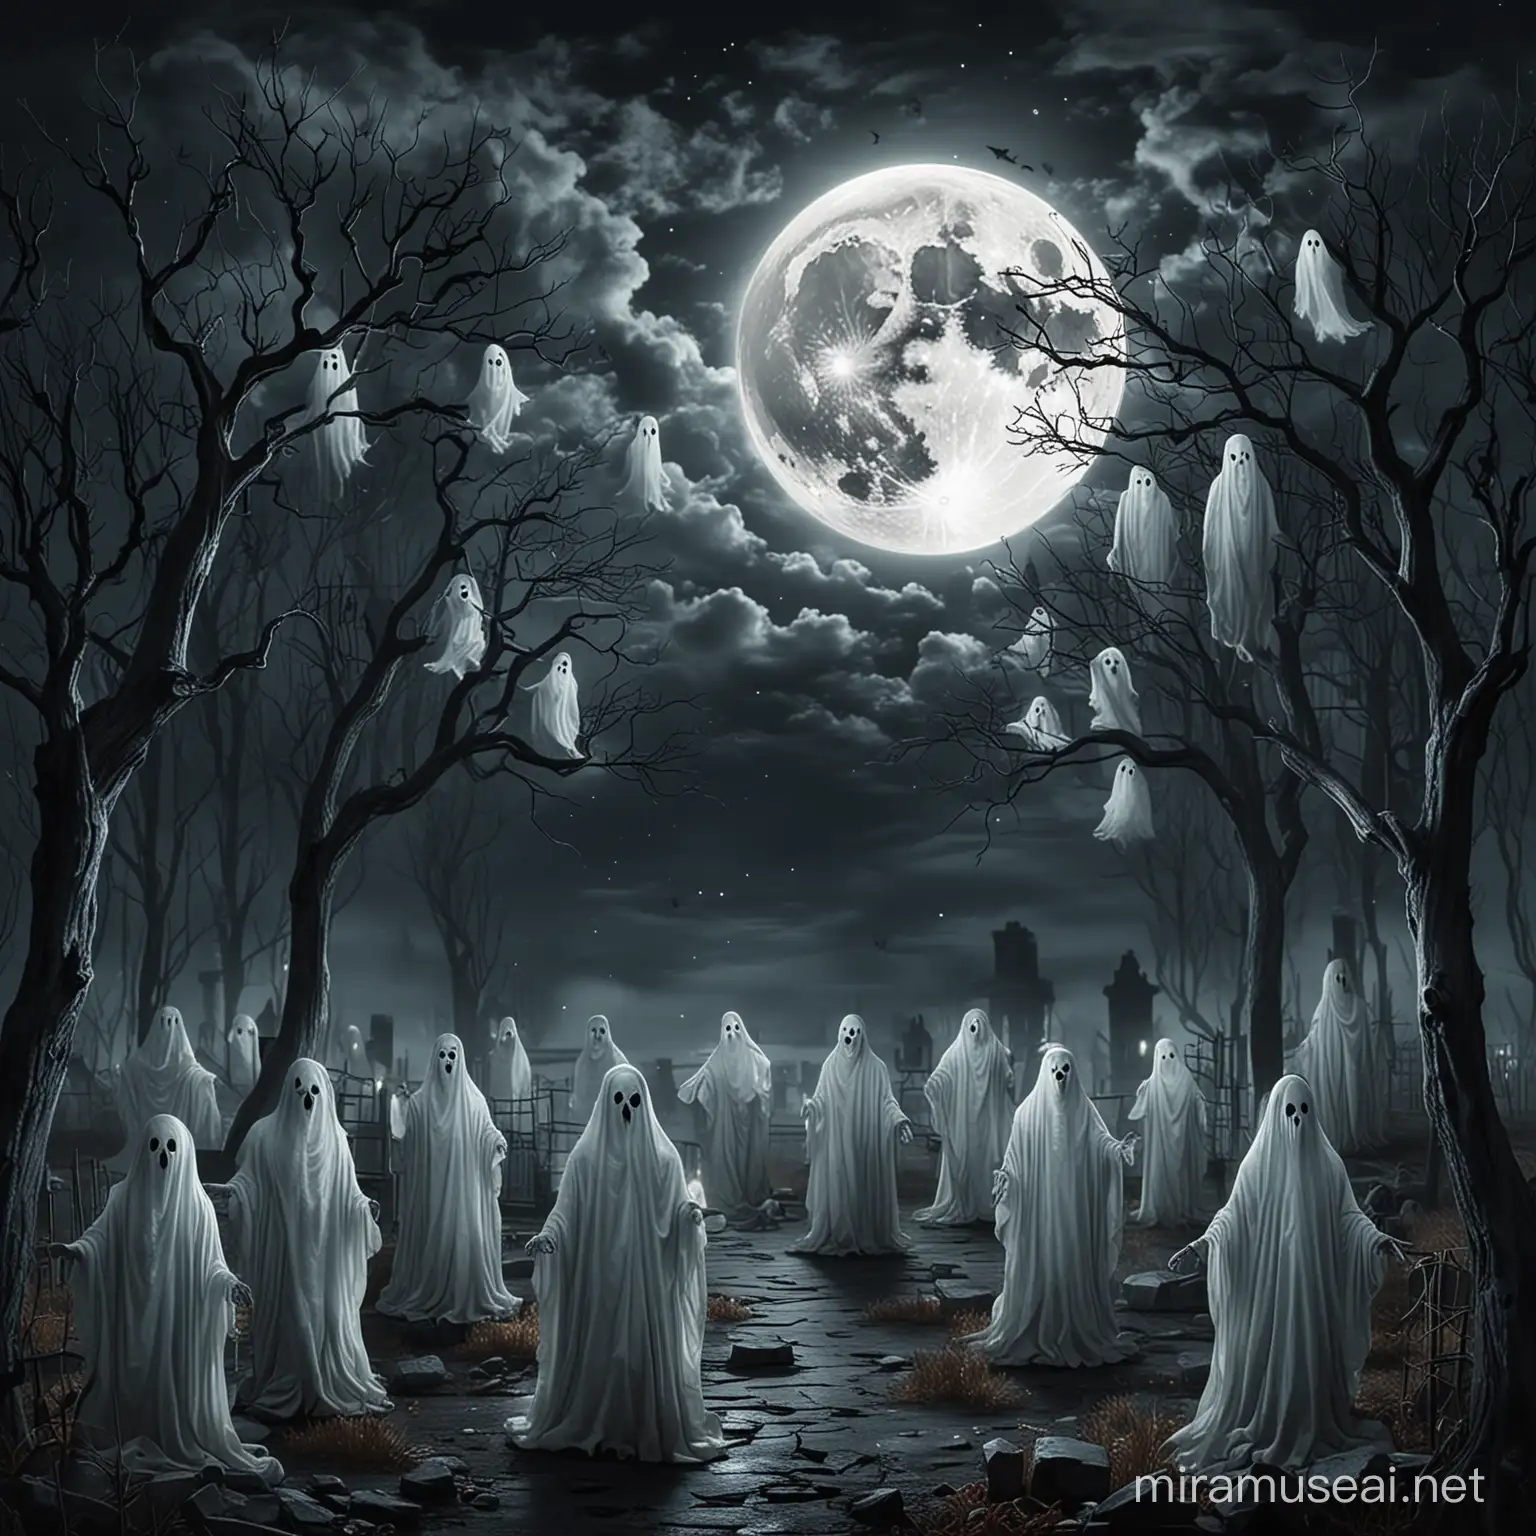 A full moon night and an atmosphere of ghosts for the design